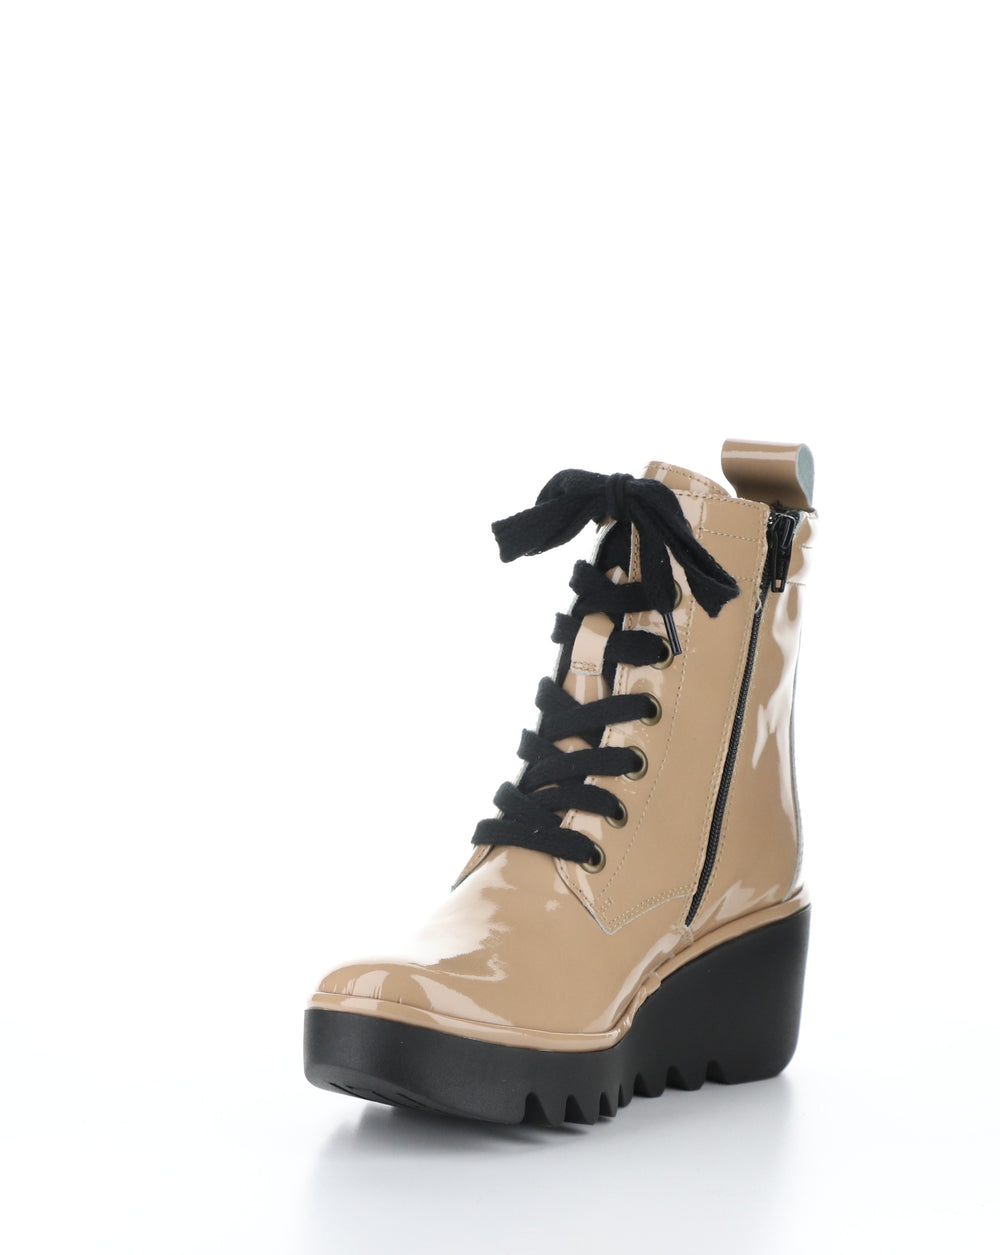 BIAZ329FLY 008 CAPPUCCINO Lace-up Boots